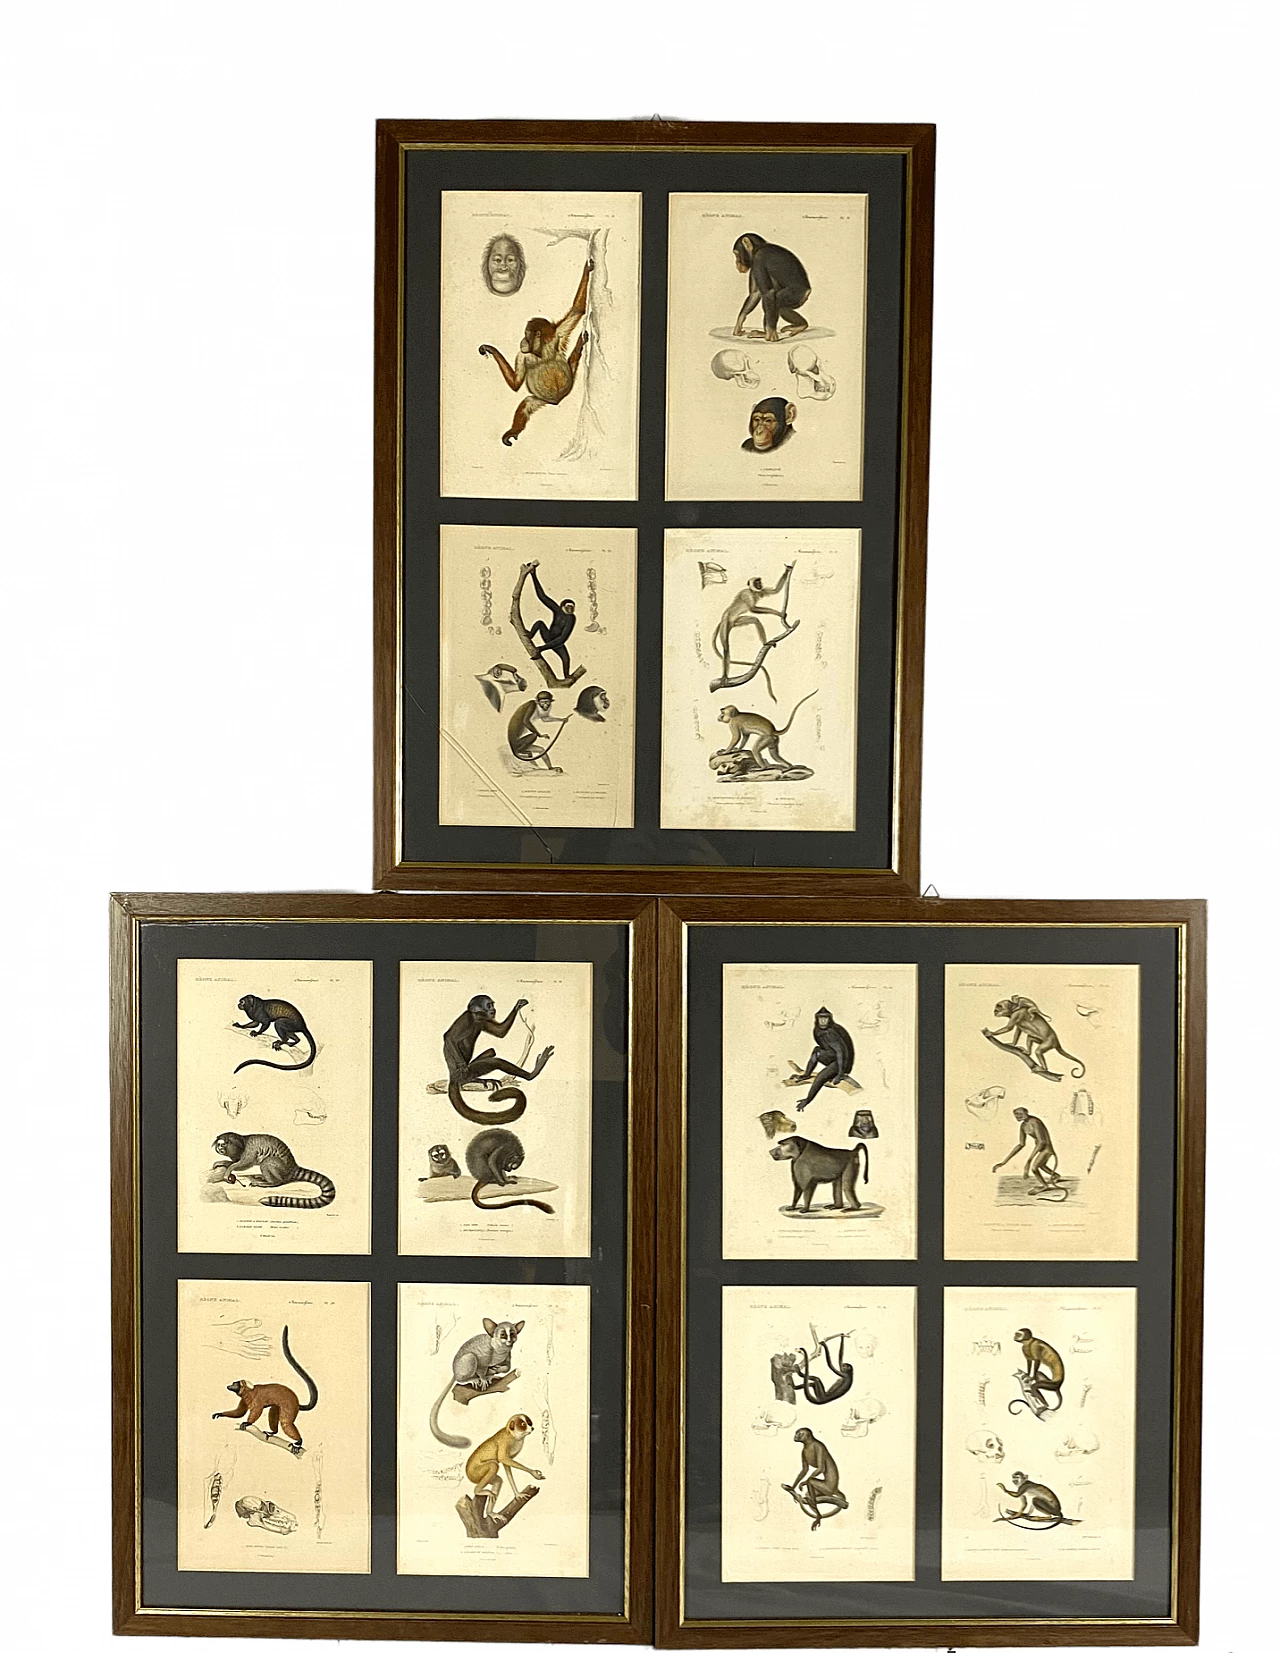 3 Framed panels with 12 engravings from "Le Règne Animal" Georges Cuvier, 19th century 1470805